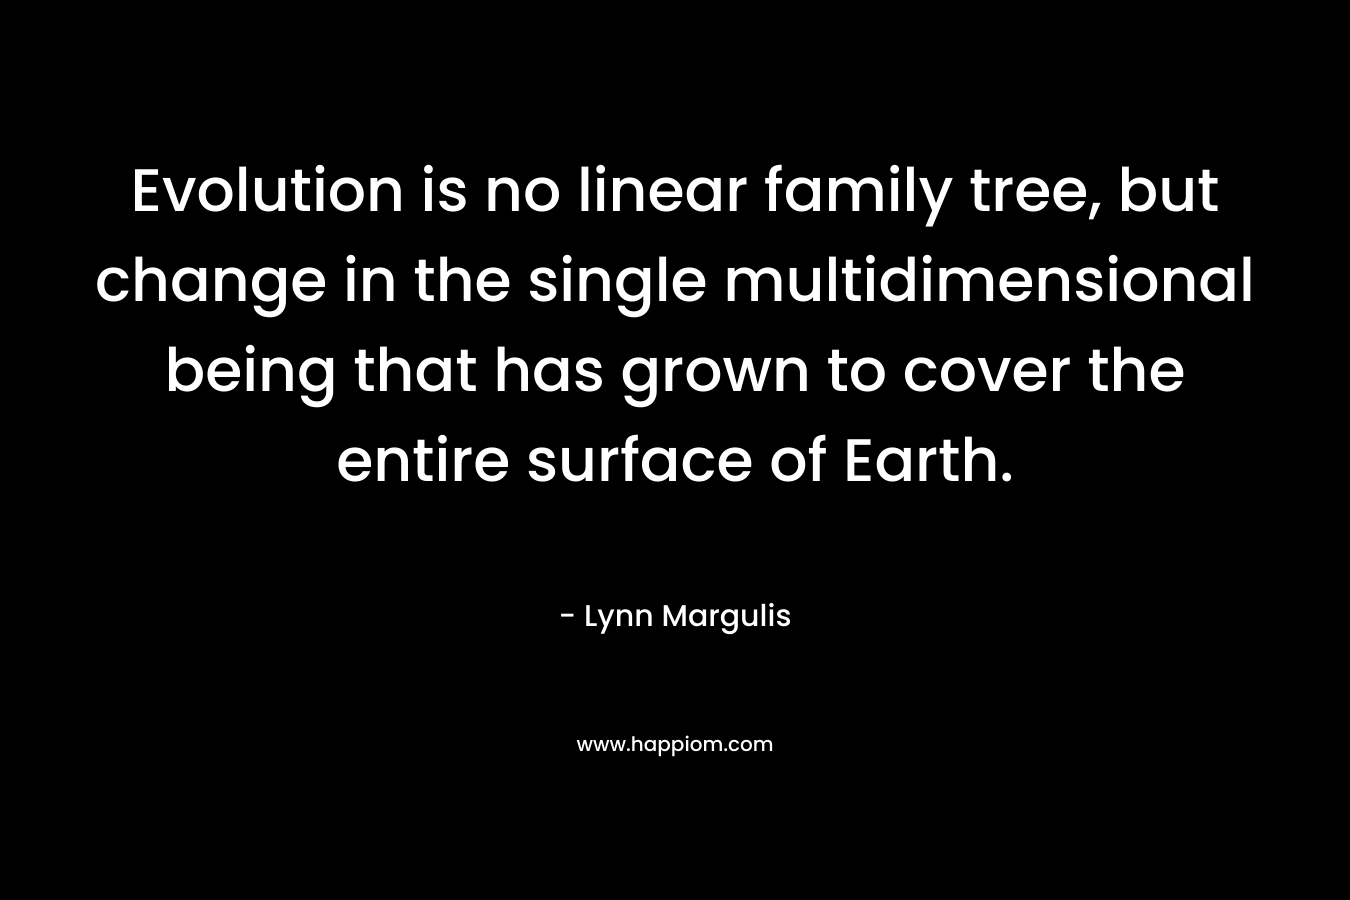 Evolution is no linear family tree, but change in the single multidimensional being that has grown to cover the entire surface of Earth.